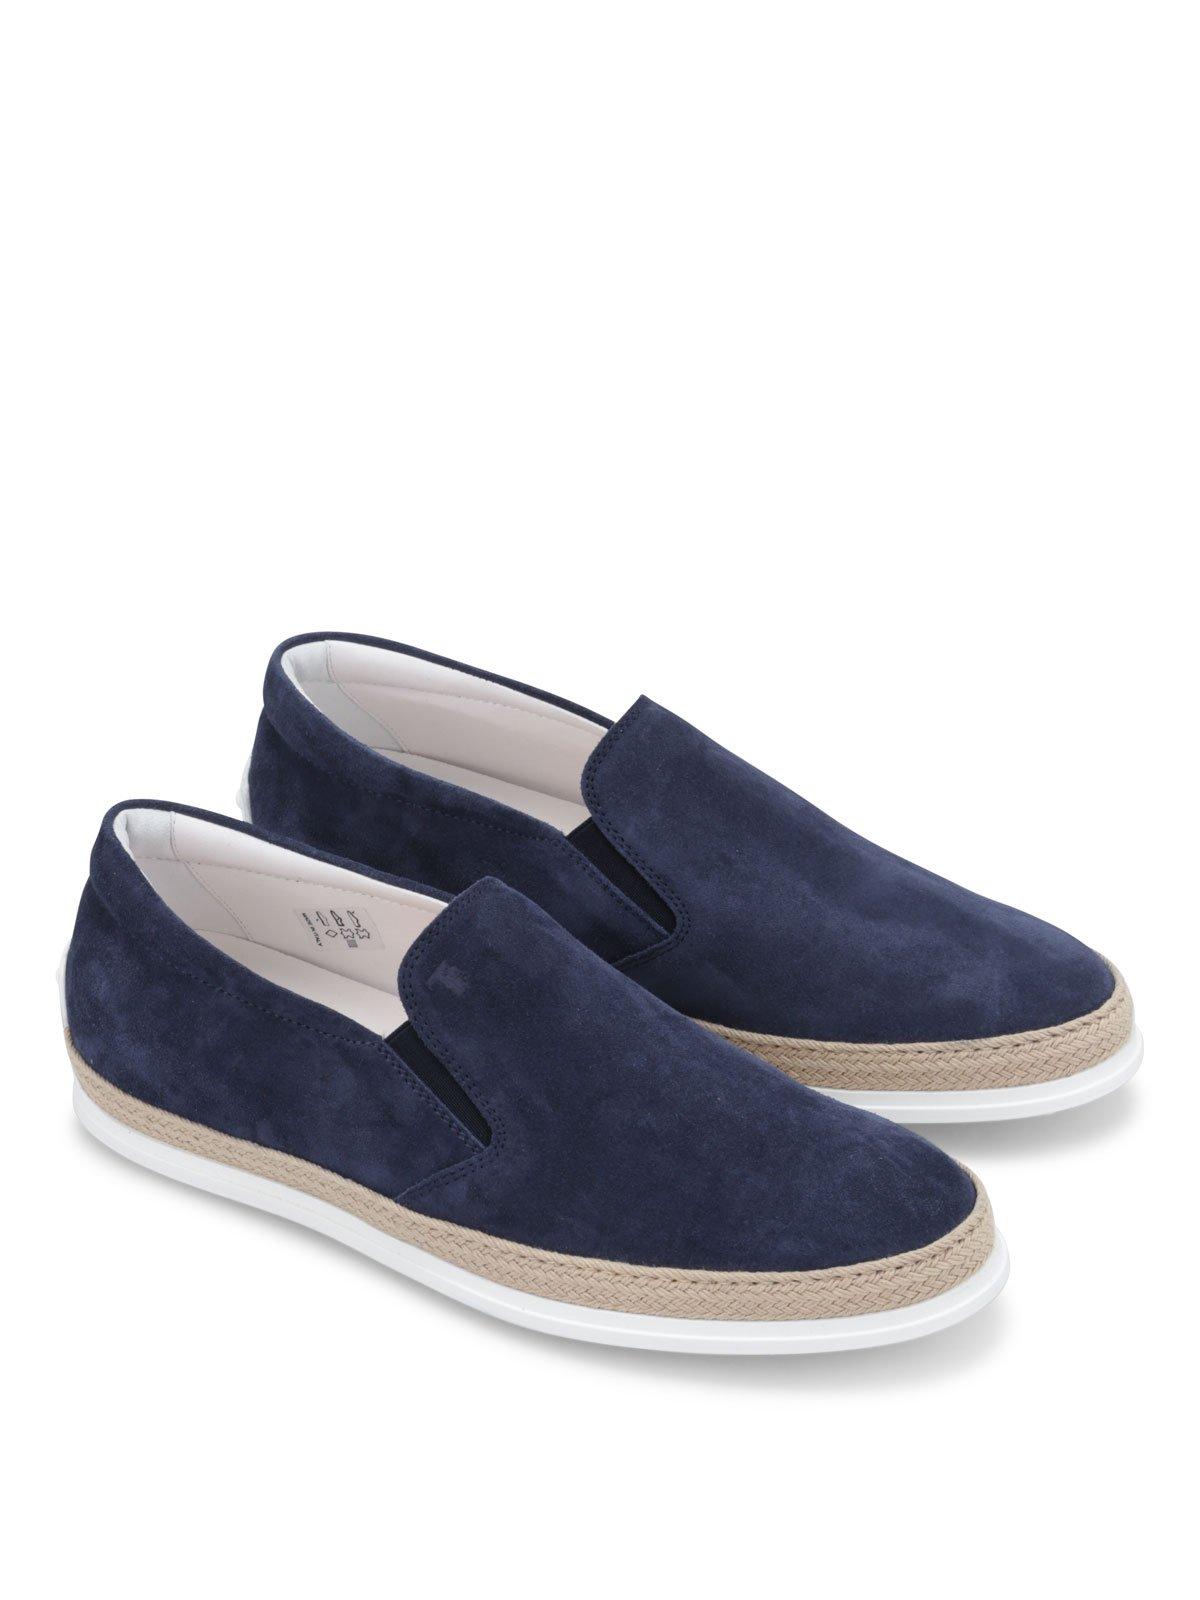 Tod's Leather Slip On Sneakers in Blue for Men - Lyst